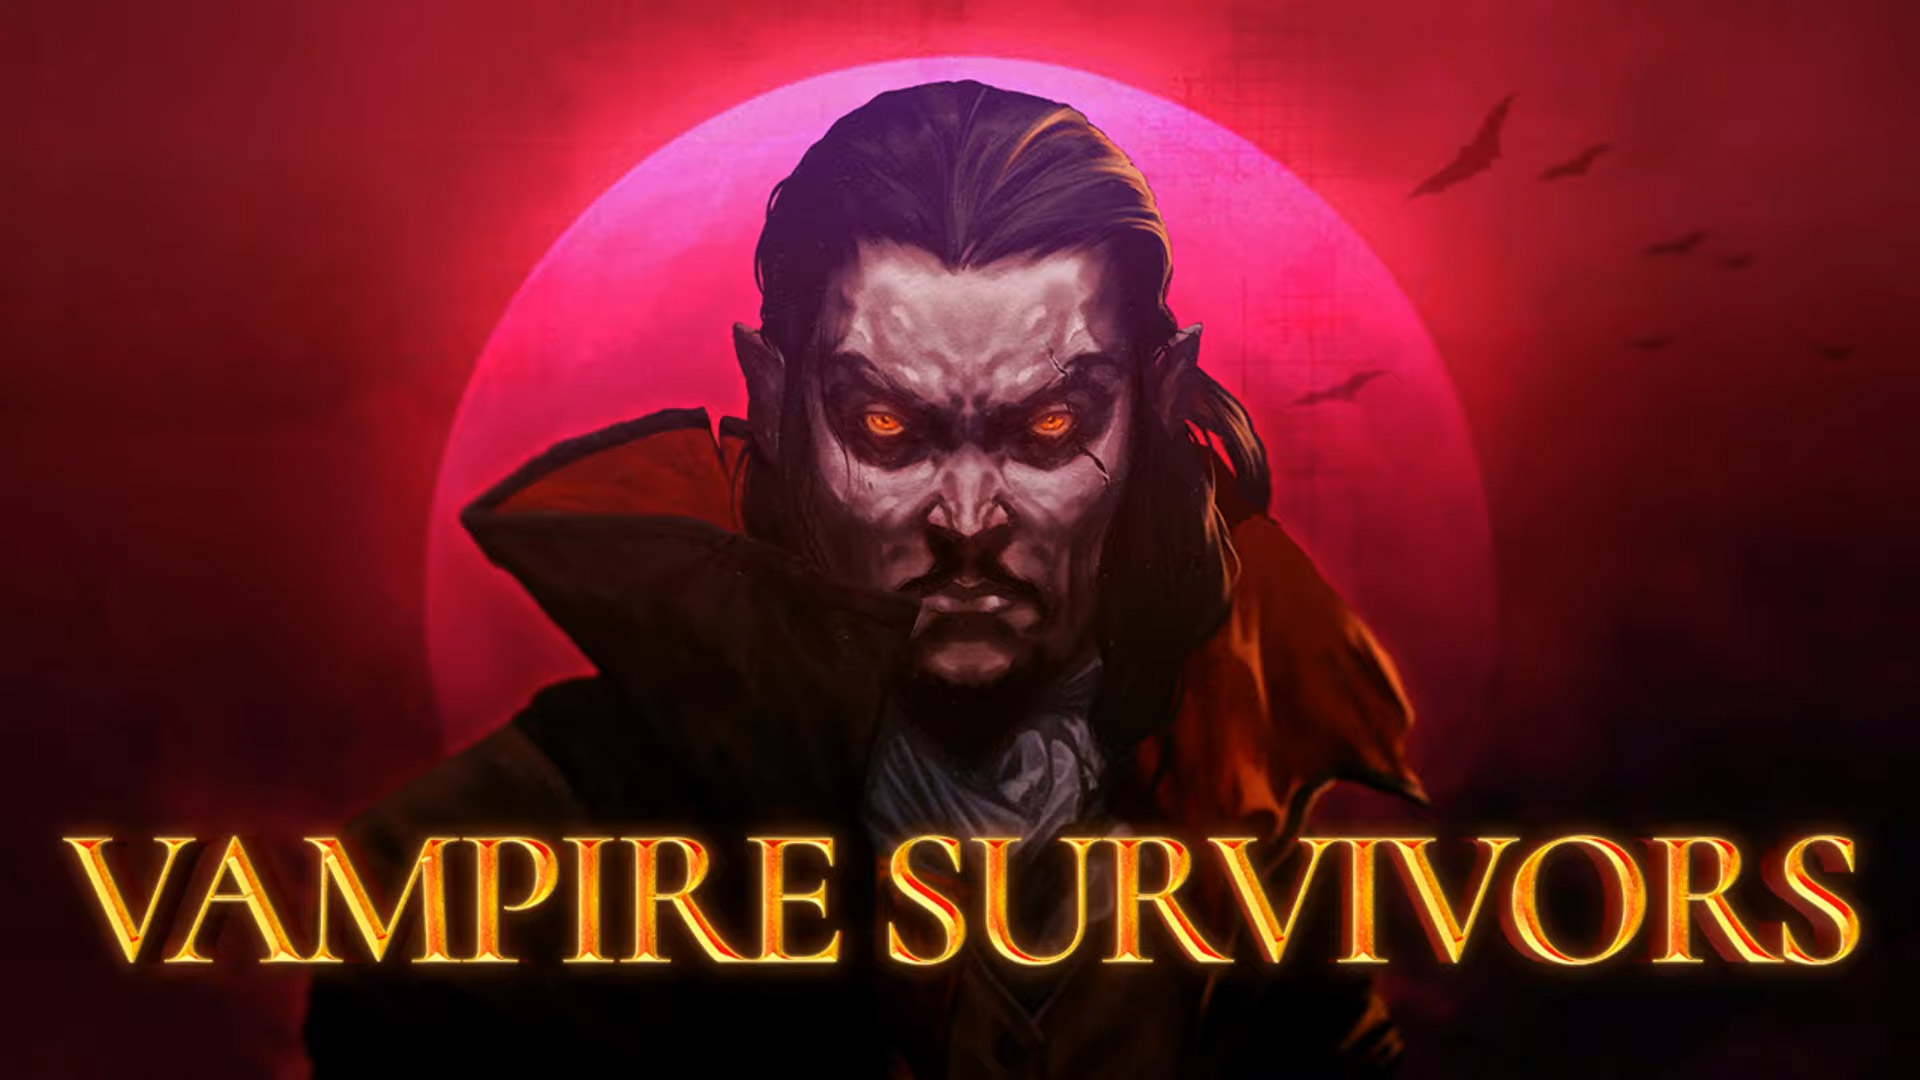 Vampire Survivors update 0.6.1 is the gift that keeps on giving